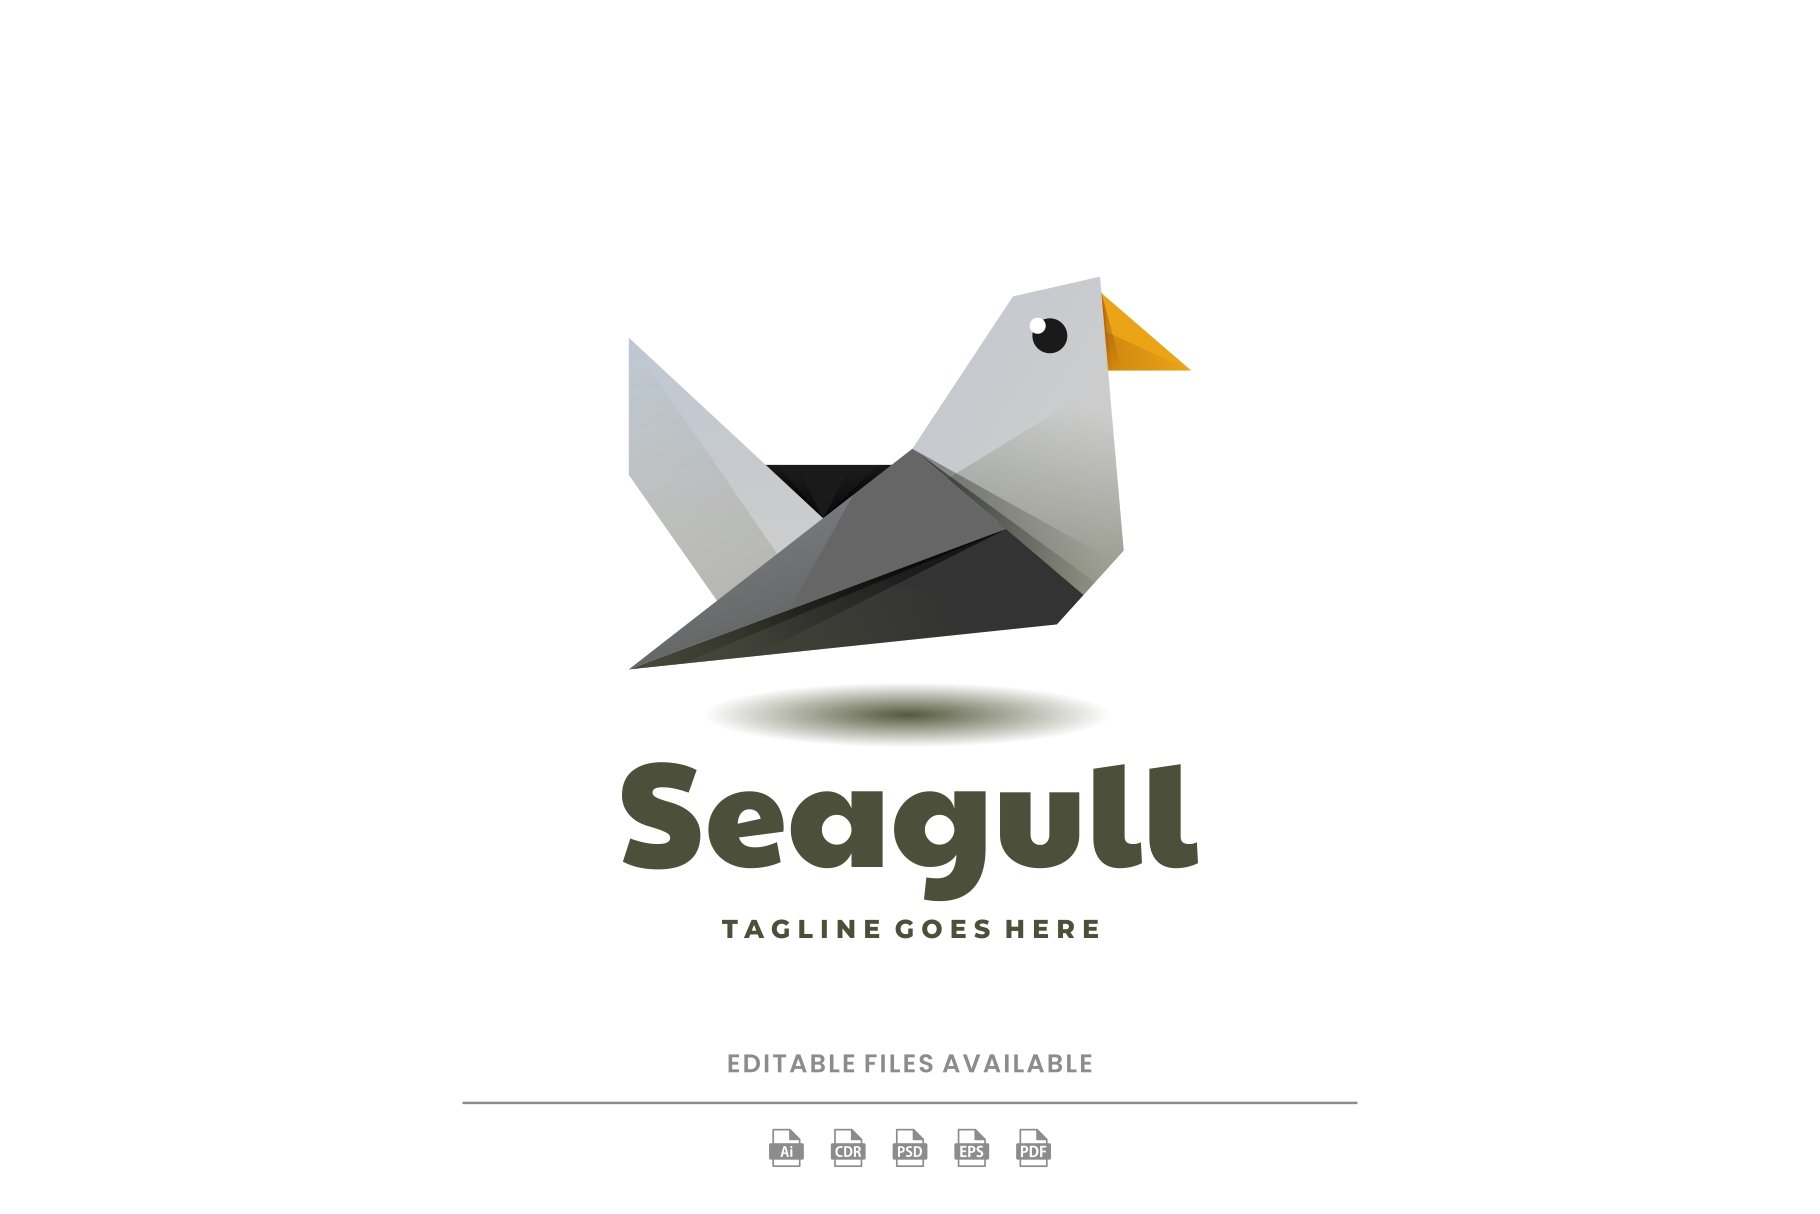 Seagull Low Poly Logo cover image.